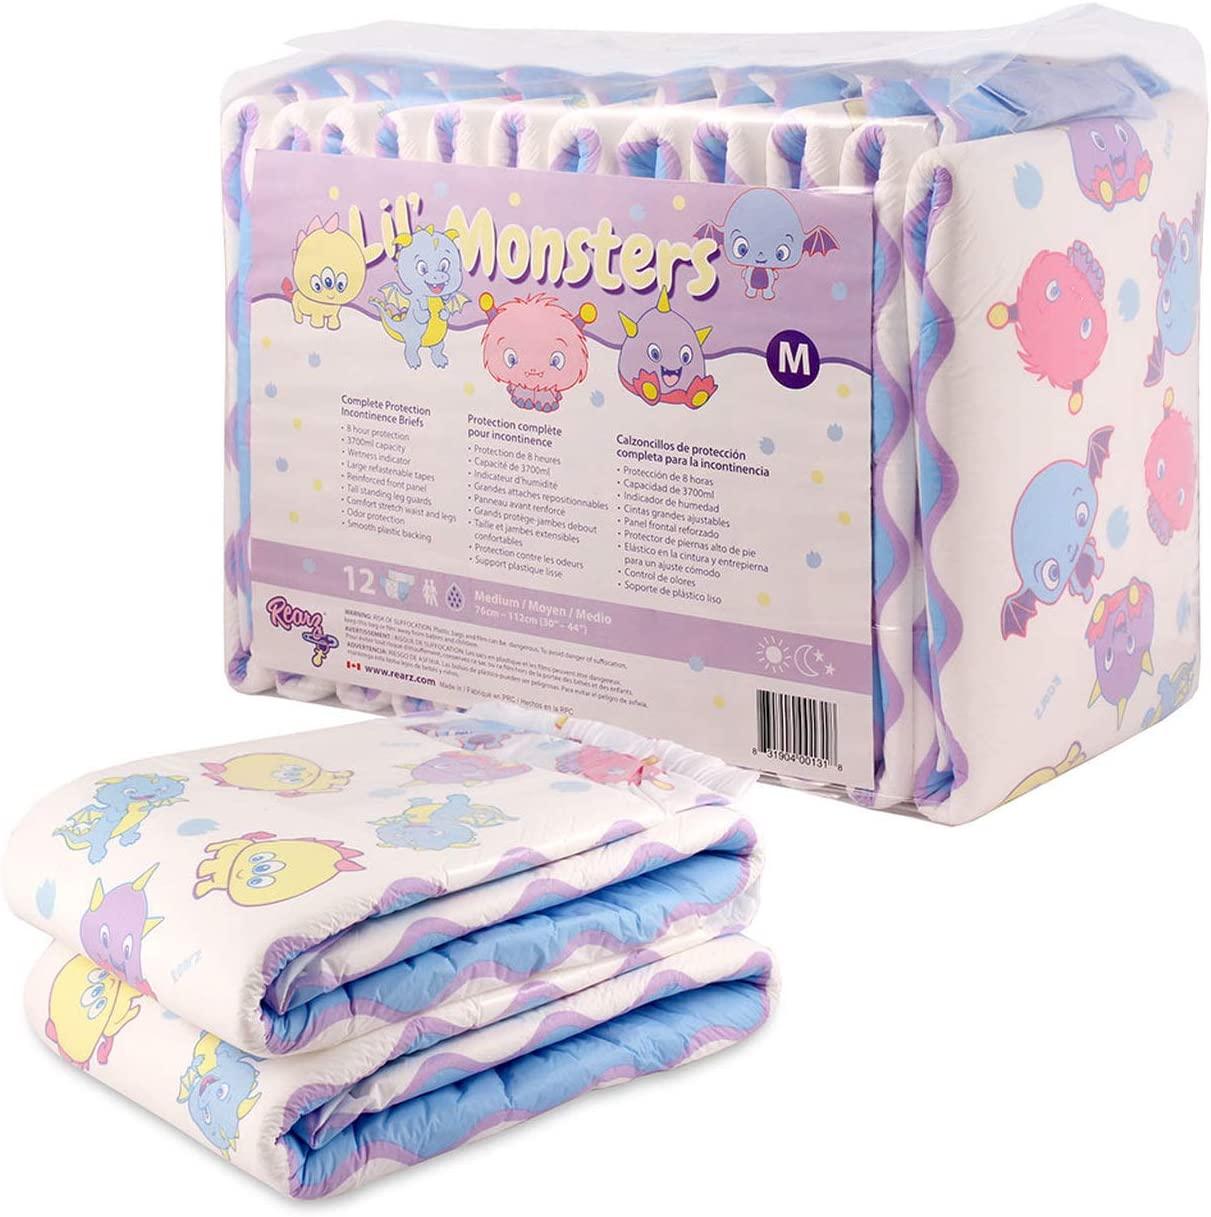 Rearz - Lil' Monsters - V3.0 - Adult Diapers (12 Pack) (Medium)